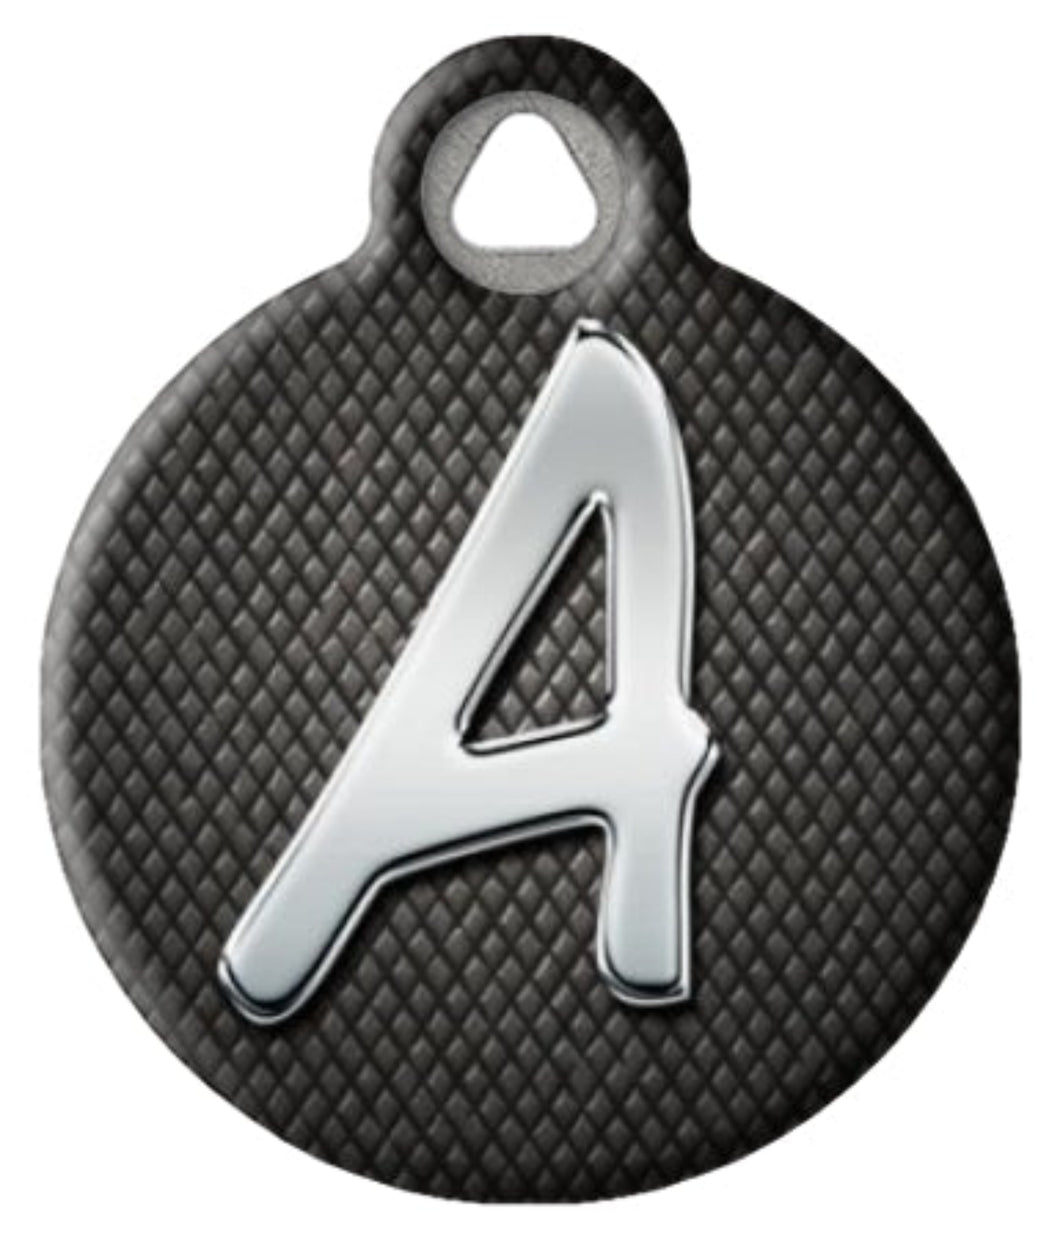 Chrome monogram pet ID tag with your choice of letter